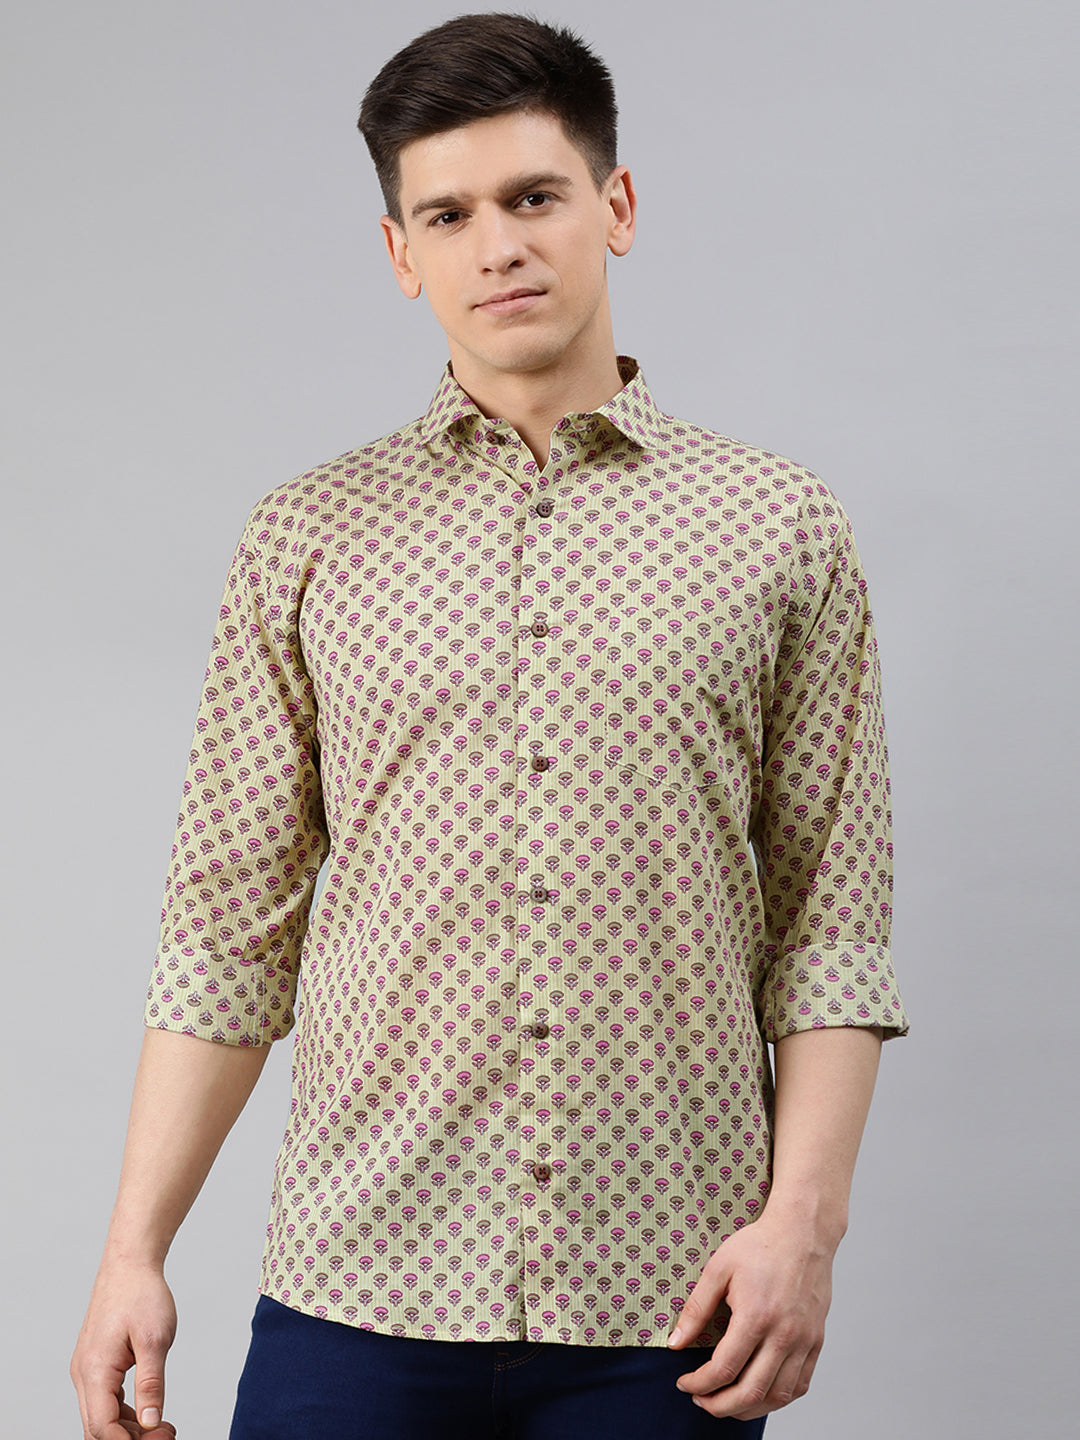 Yellow Cotton Full Sleeves Shirts For Men